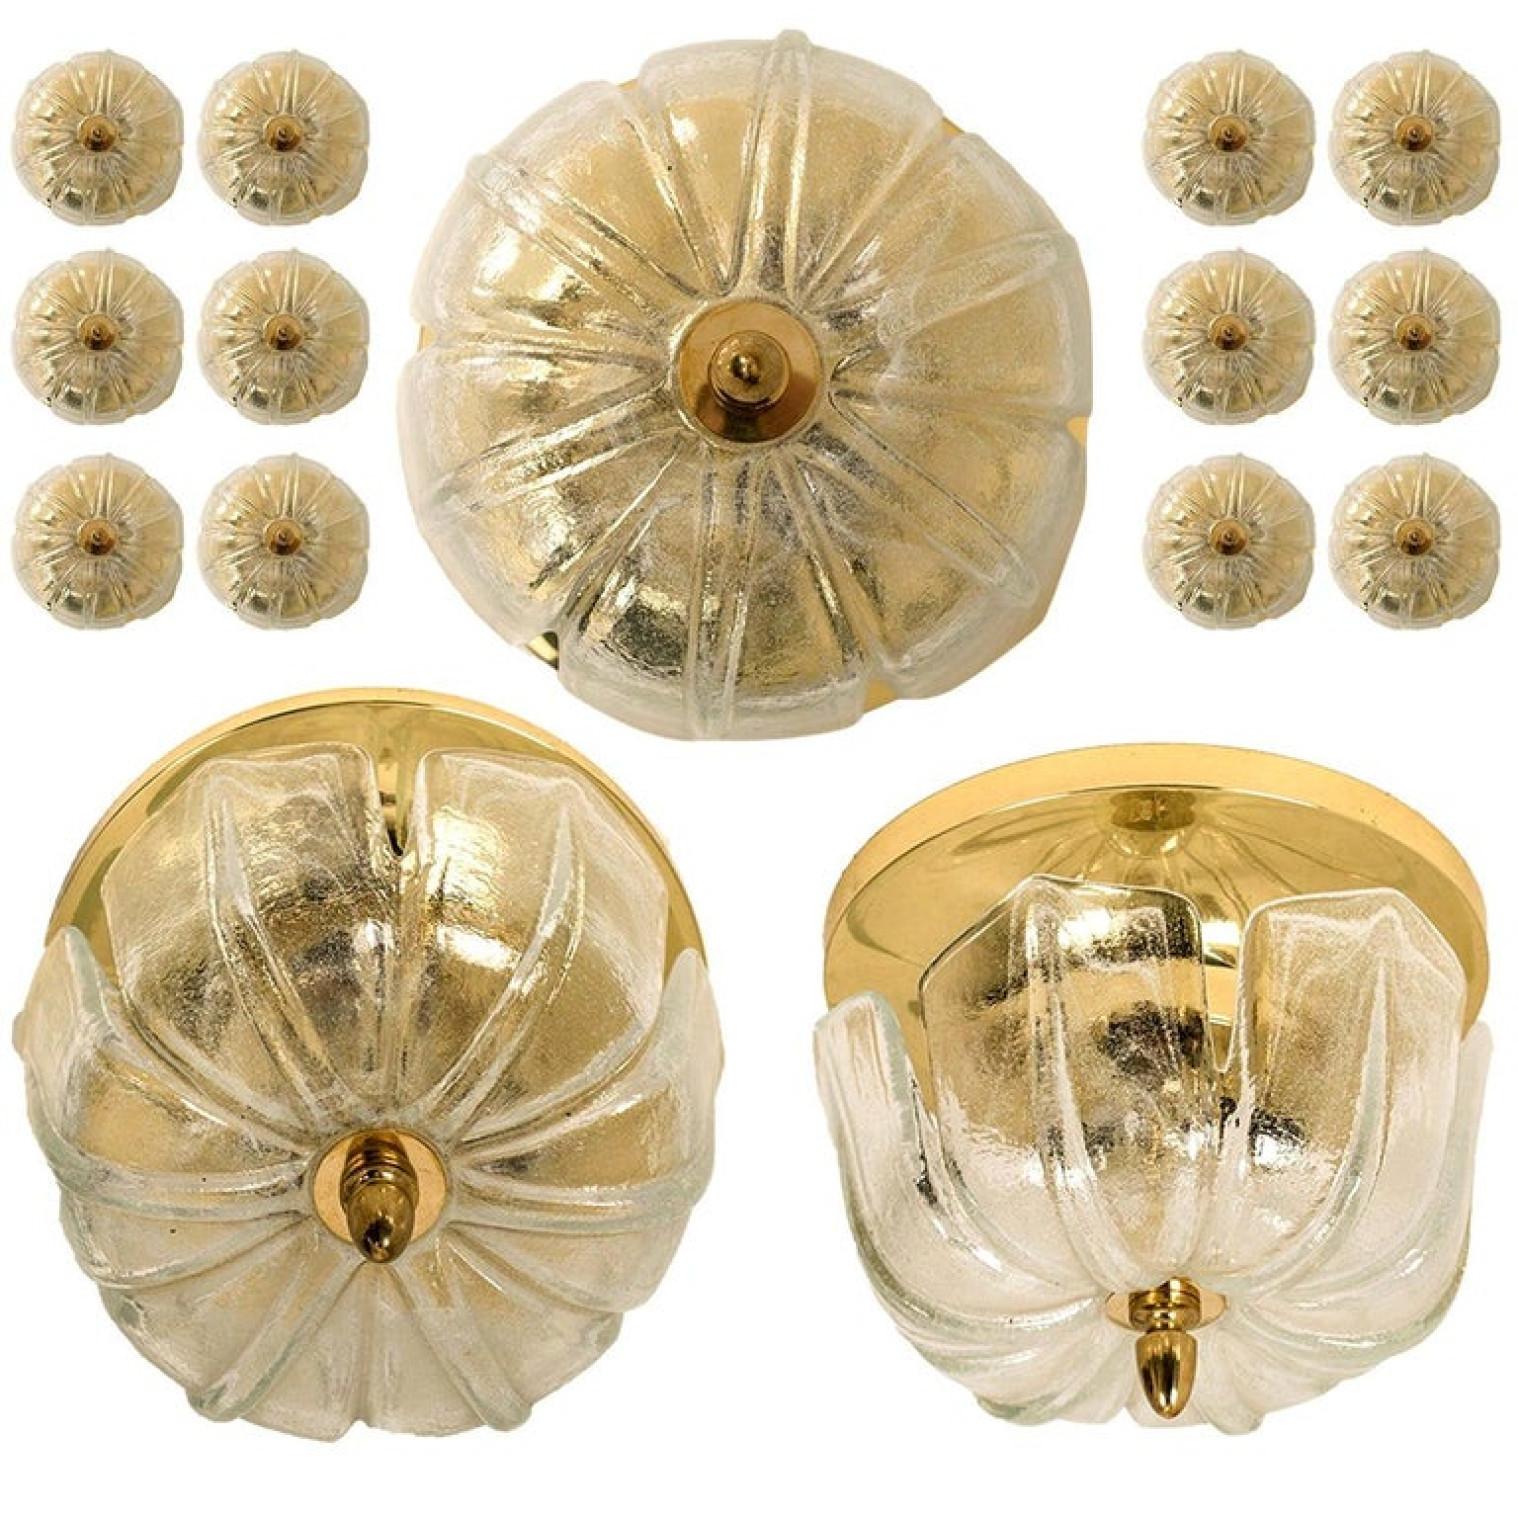 Large set of Limburg glass wall lights/ ceiling lights tulip shaped shade on a brass frame, circa 1970s, Germany.
The handmade high quality shades gives texture which fades towards the edges.

These sculptural wall lights could also be used as